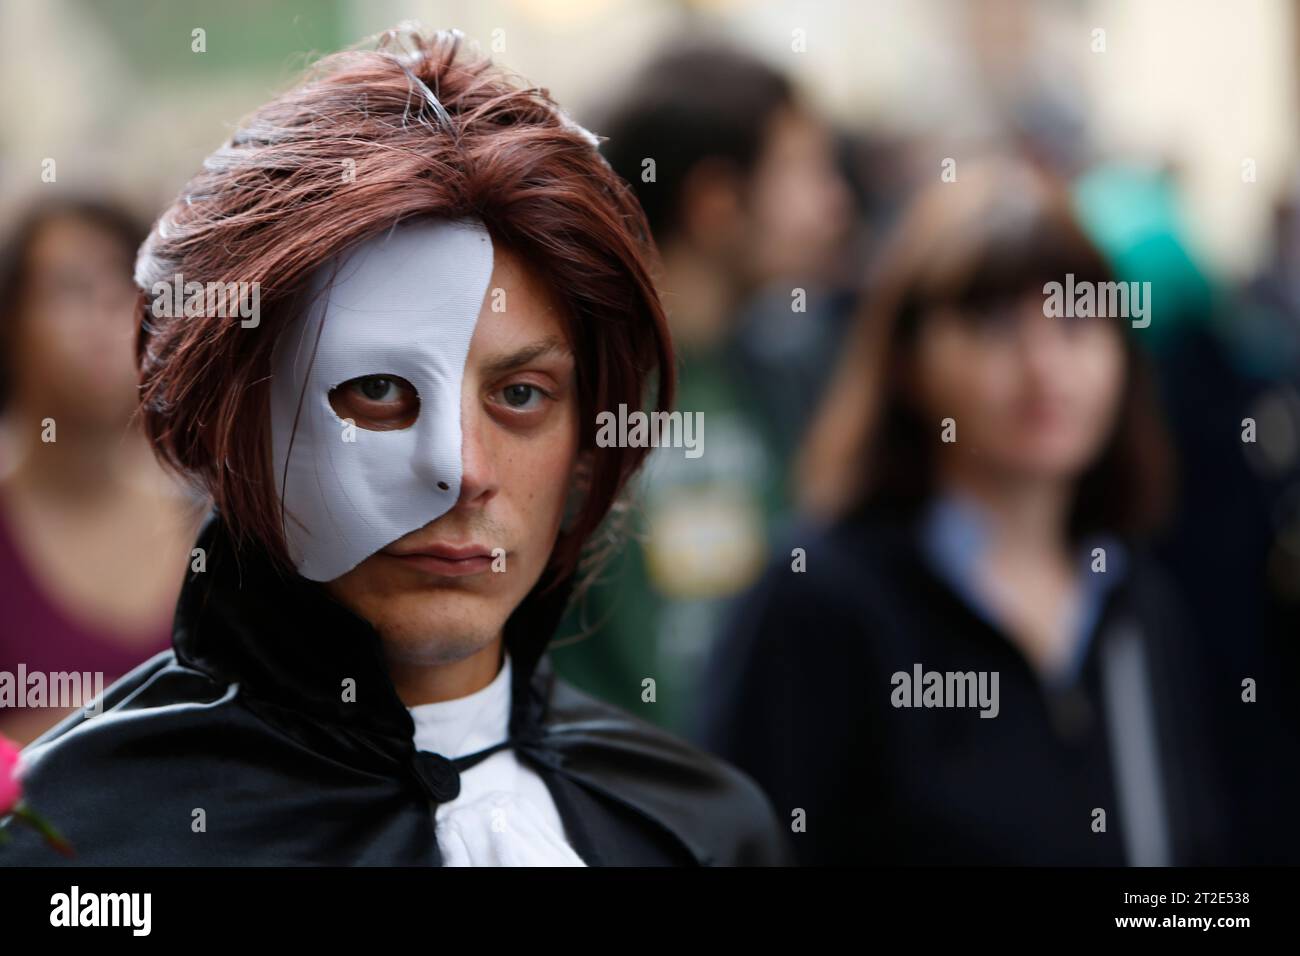 Lucca, Italy - 2018 10 31 : Lucca Comics free cosplay event around city the Phantom of the Opera. High quality photo Stock Photo